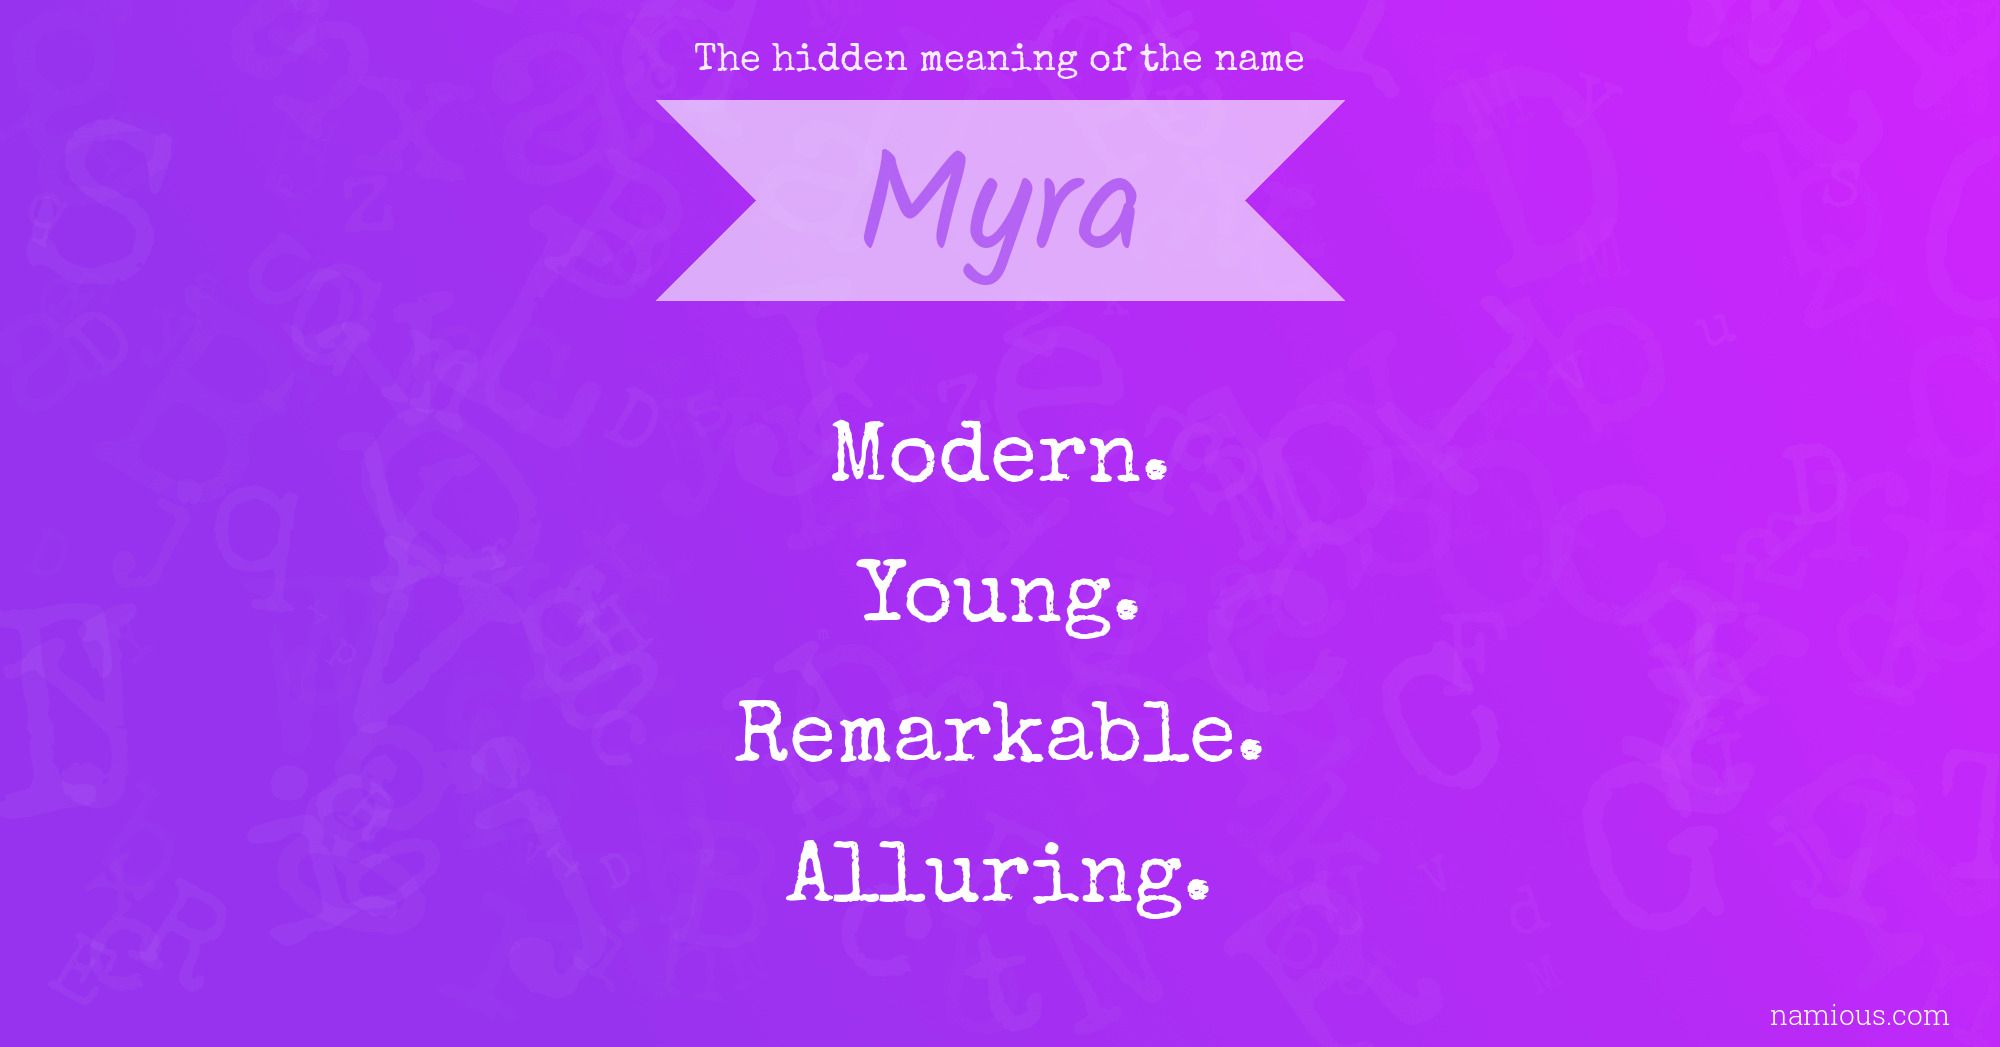 The hidden meaning of the name Myra